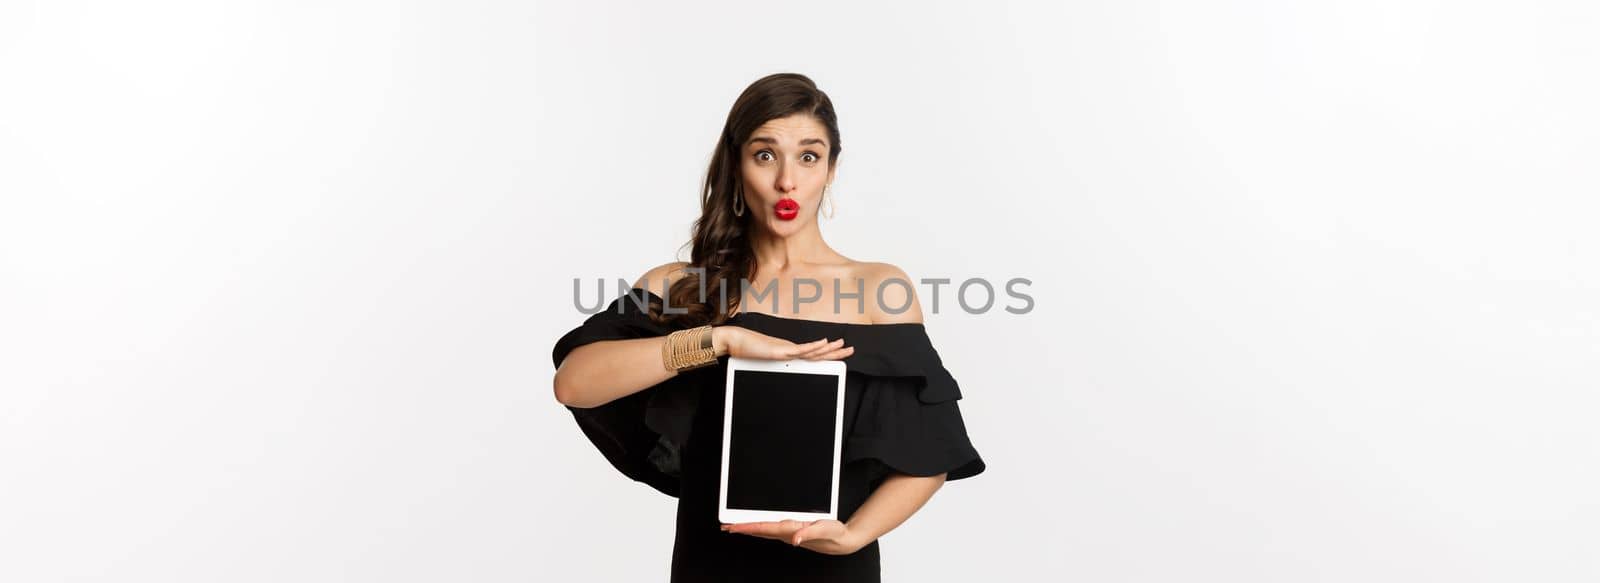 Fashion and shopping concept. Beautiful woman with red lipsticks, black dress, showing tablet screen and looking excited, standing over white background by Benzoix